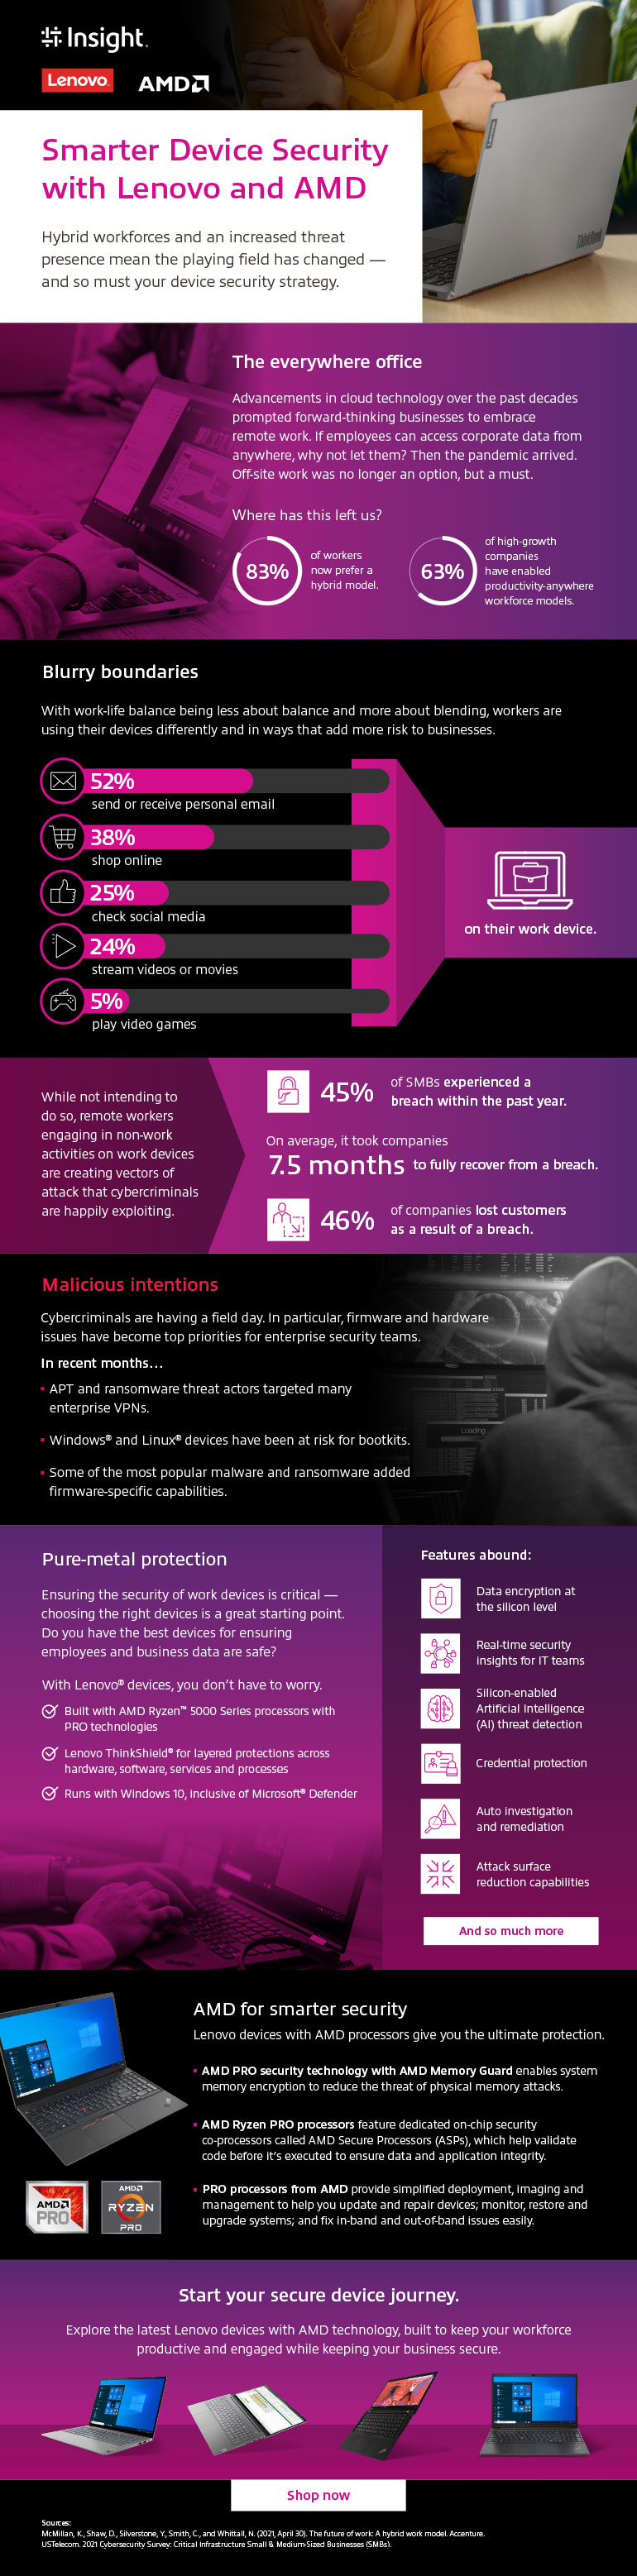 Smarter device security with Lenovo and AMD infographic as translated below.